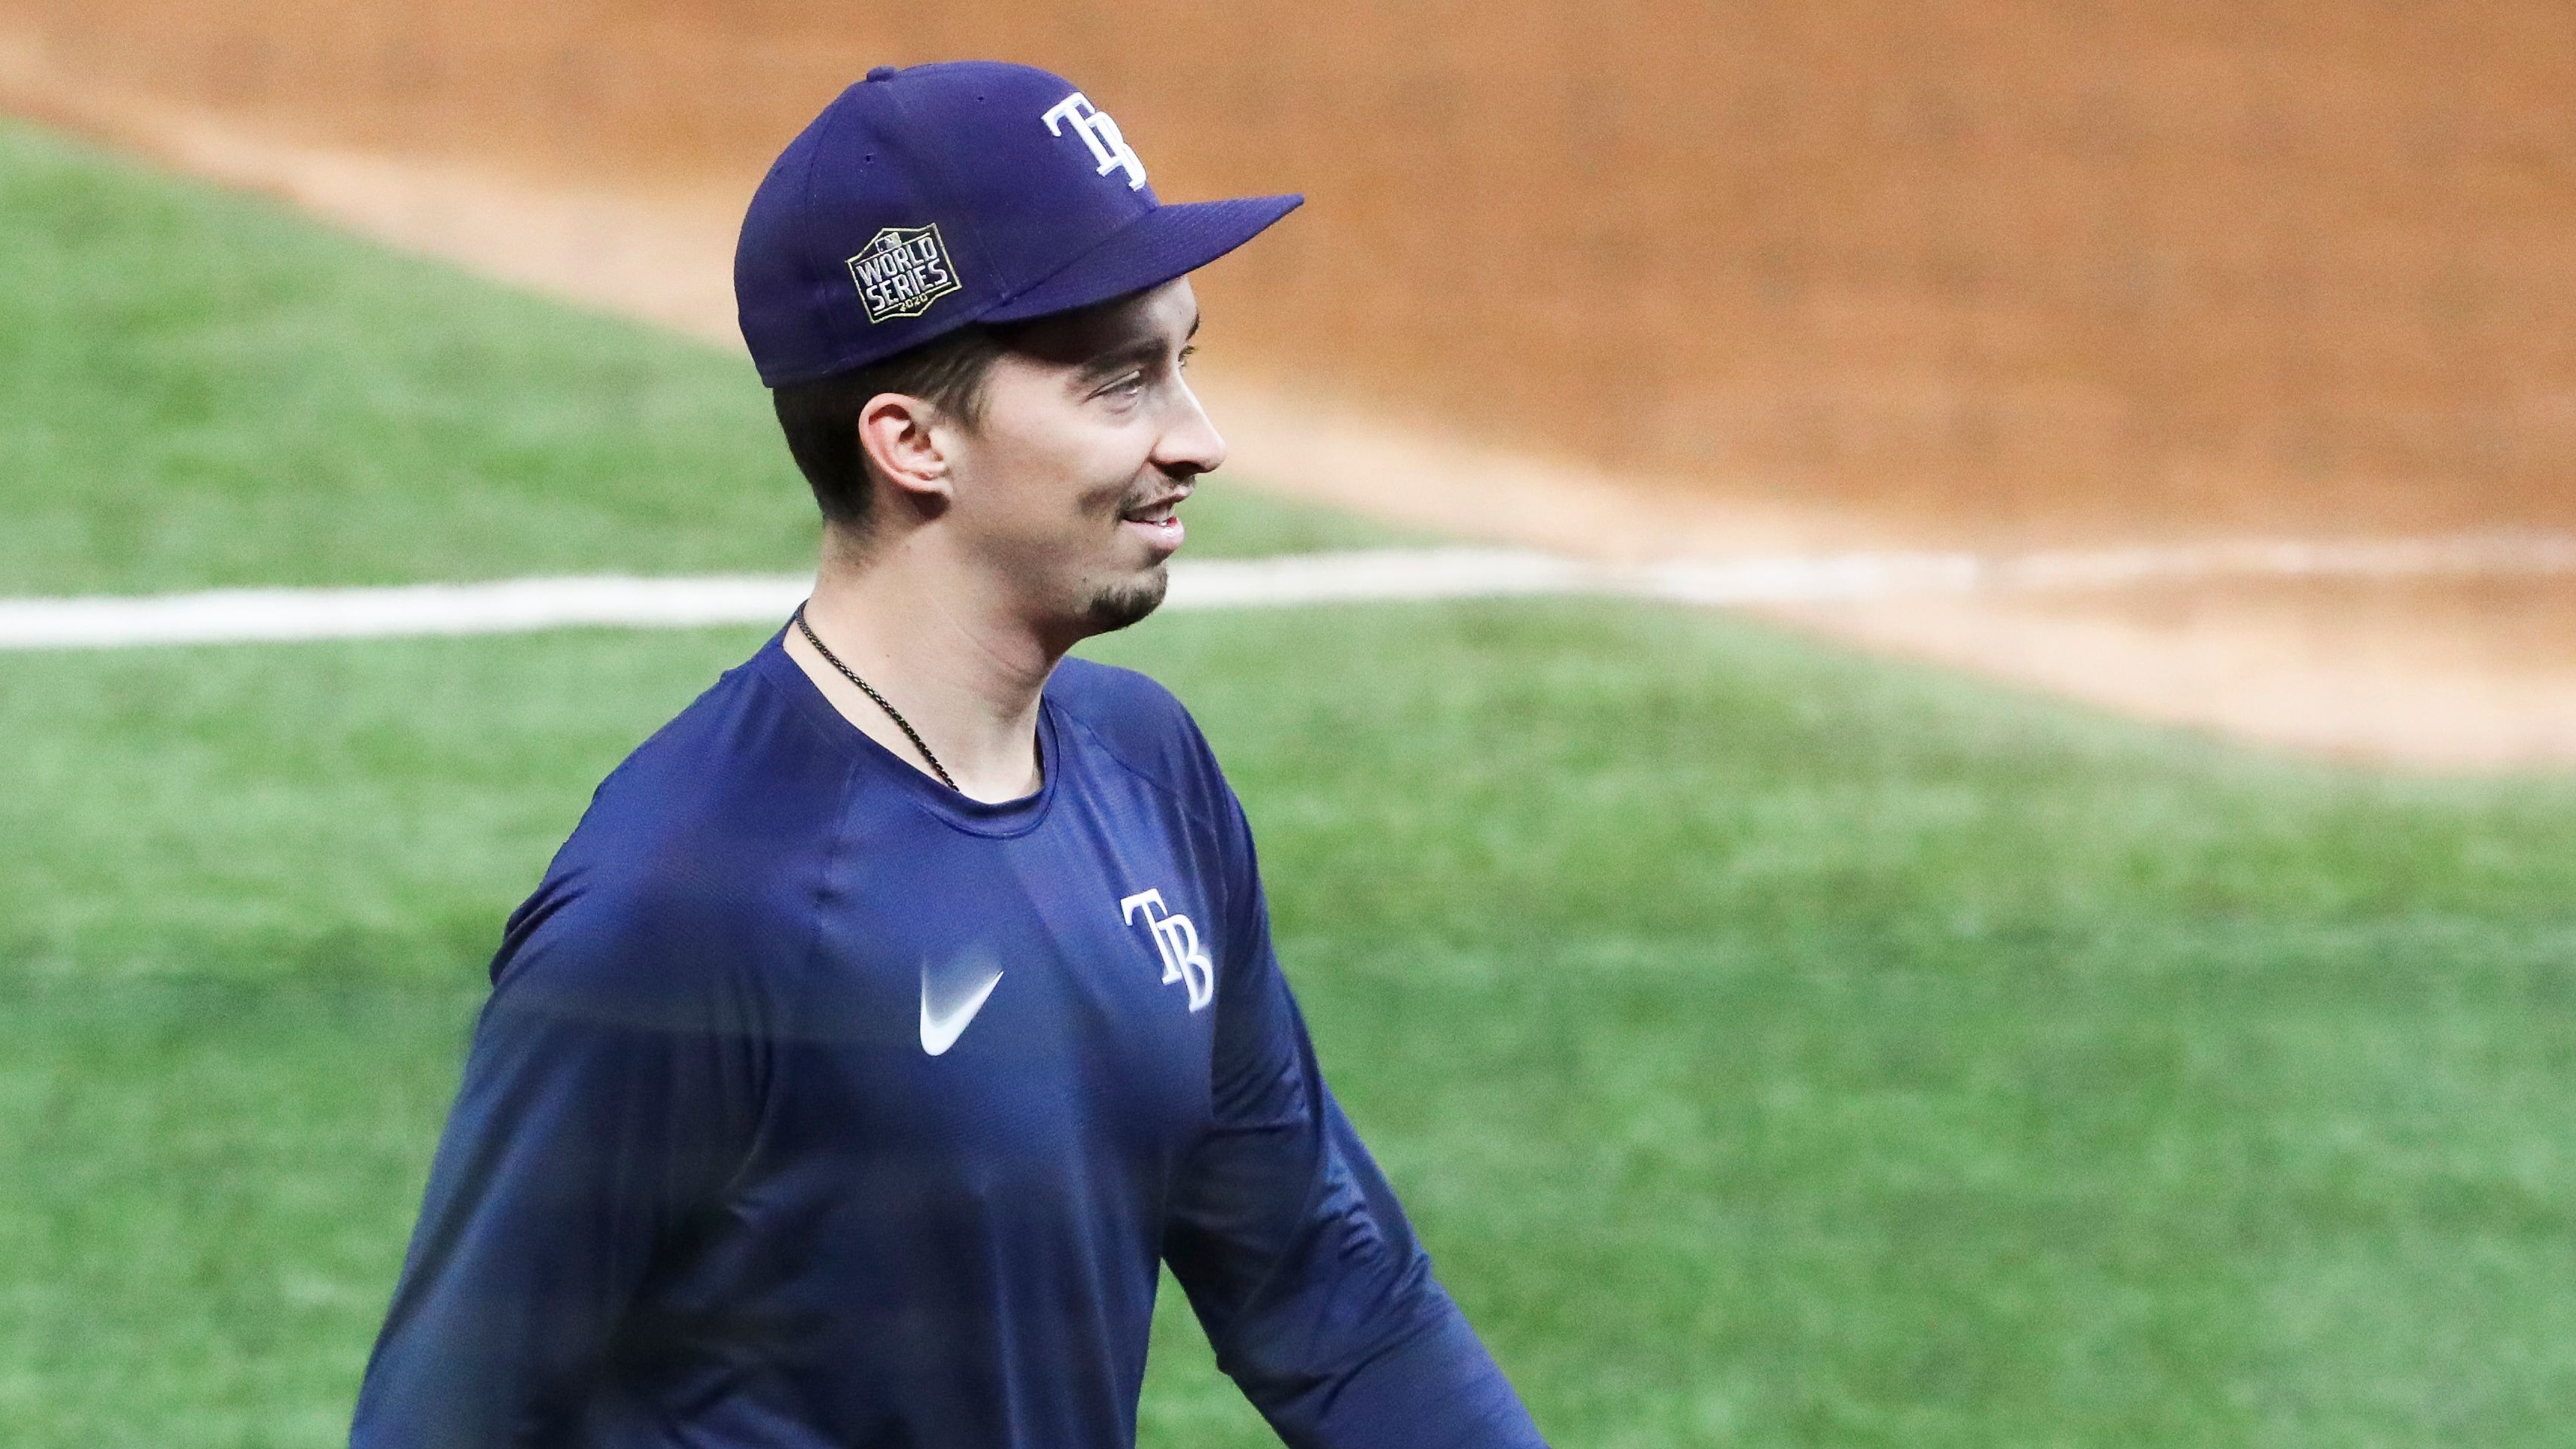 Blake Snell trade a possibility for Rays: sources